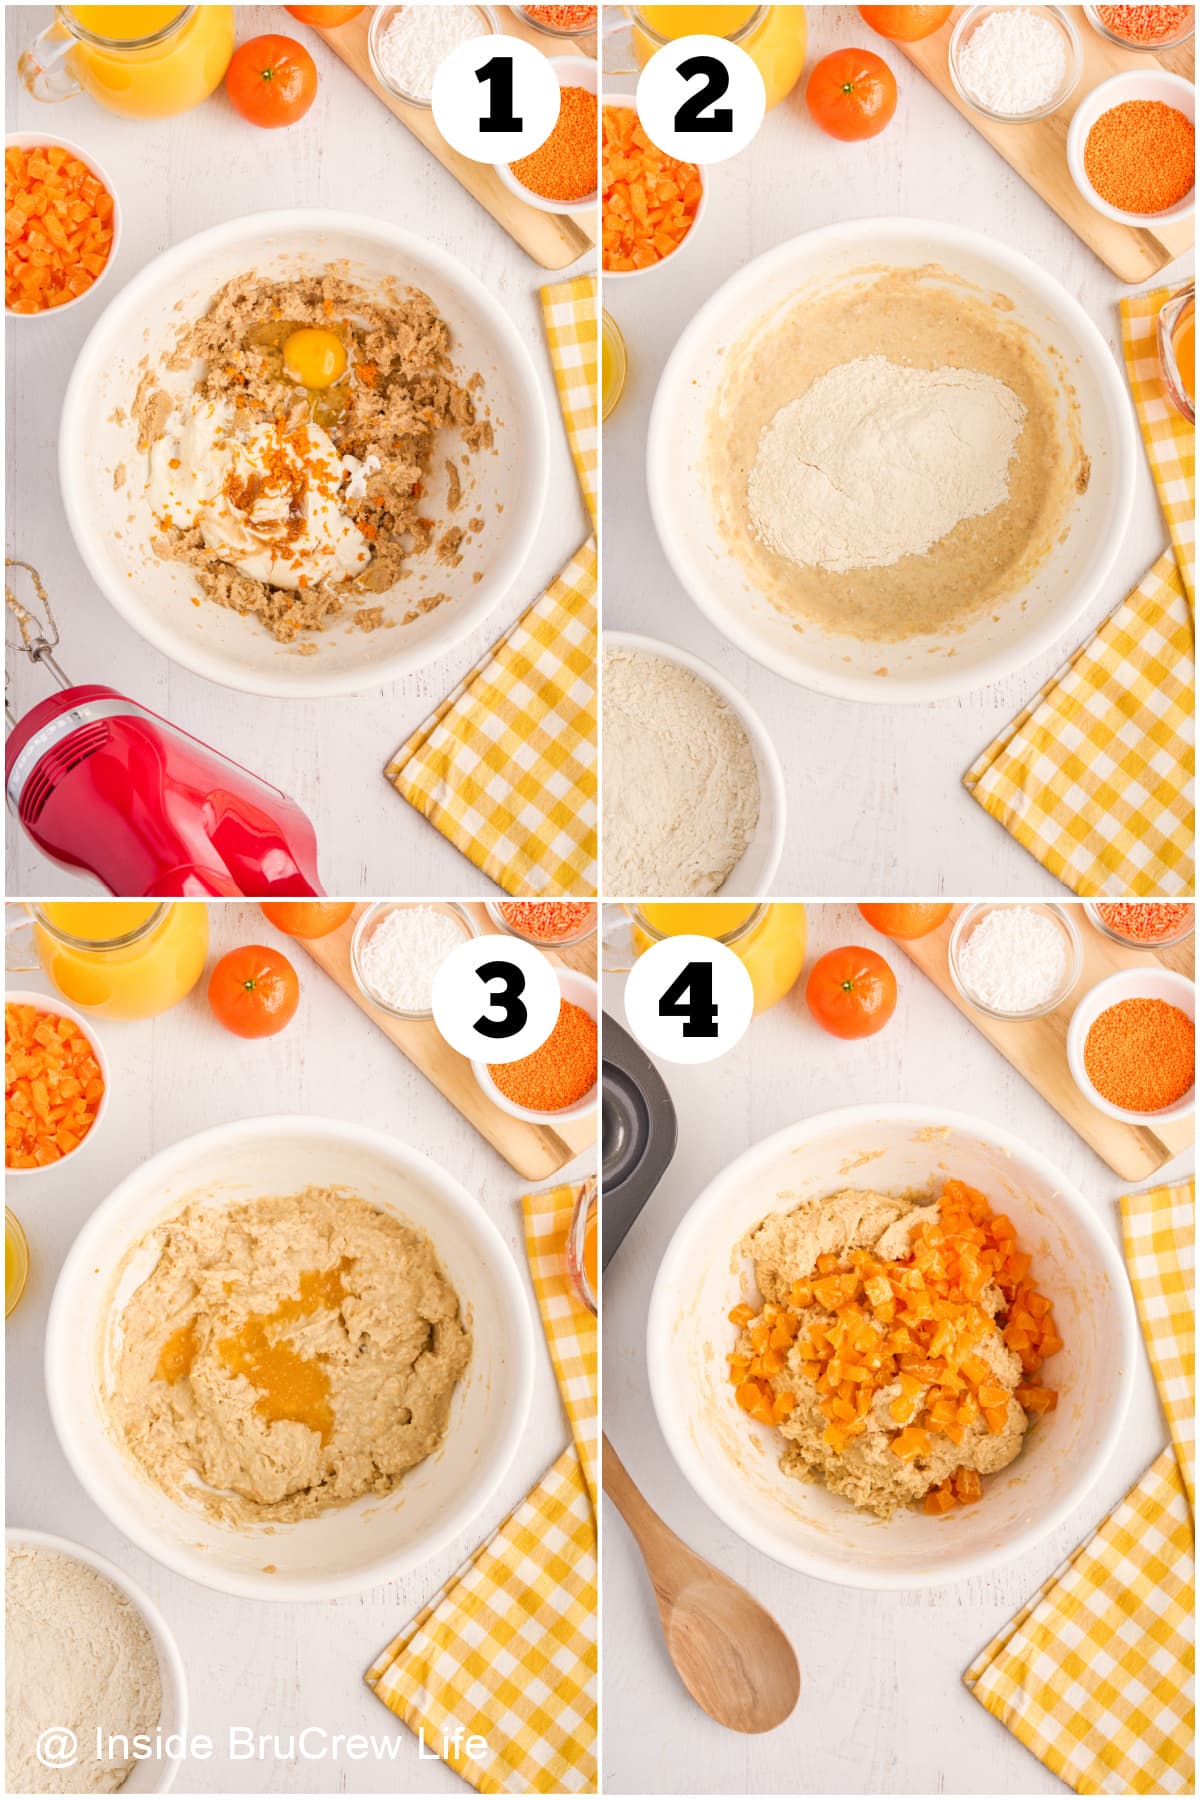 Four pictures collaged together showing how to make orange donut batter.